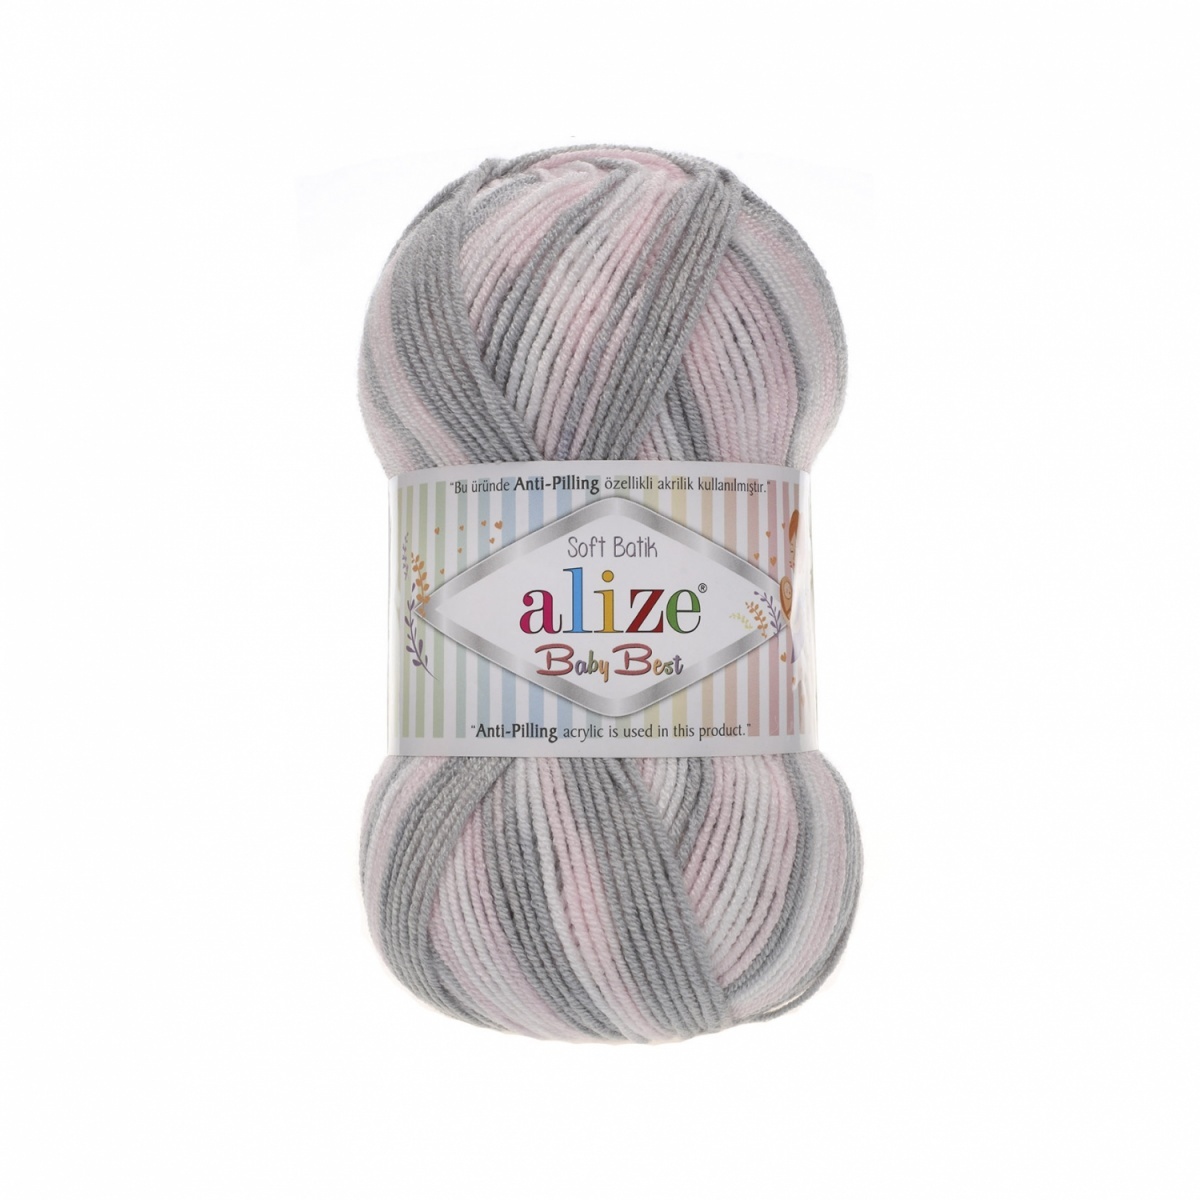 Alize Baby Best Batik, 90% acrylic, 10% bamboo 5 Skein Value Pack, 500g фото 1